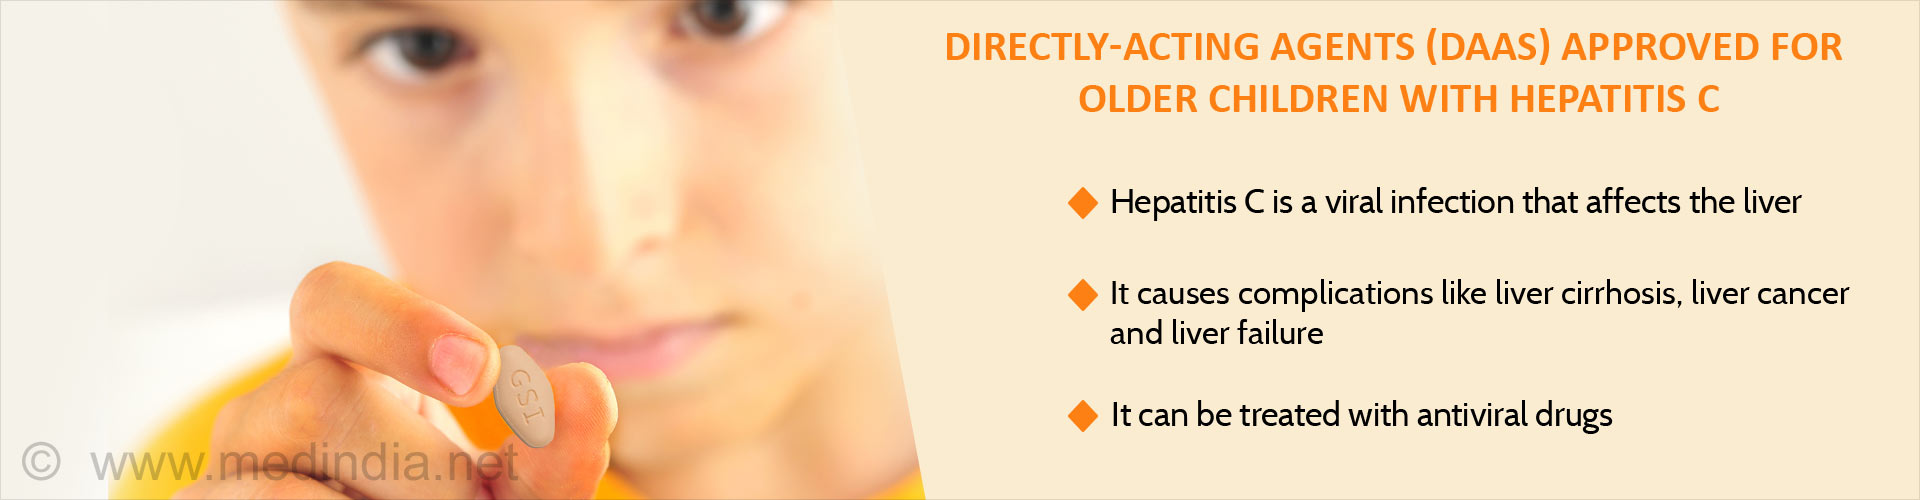 Directly-acting agents (DAAS) approved for older children with hepatitis C
- Hepatitis C is a viral infection that affects the liver
- It causes complications like liver cirrhosis, liver cancer and liver failure
- It can be treated with antiviral drugs